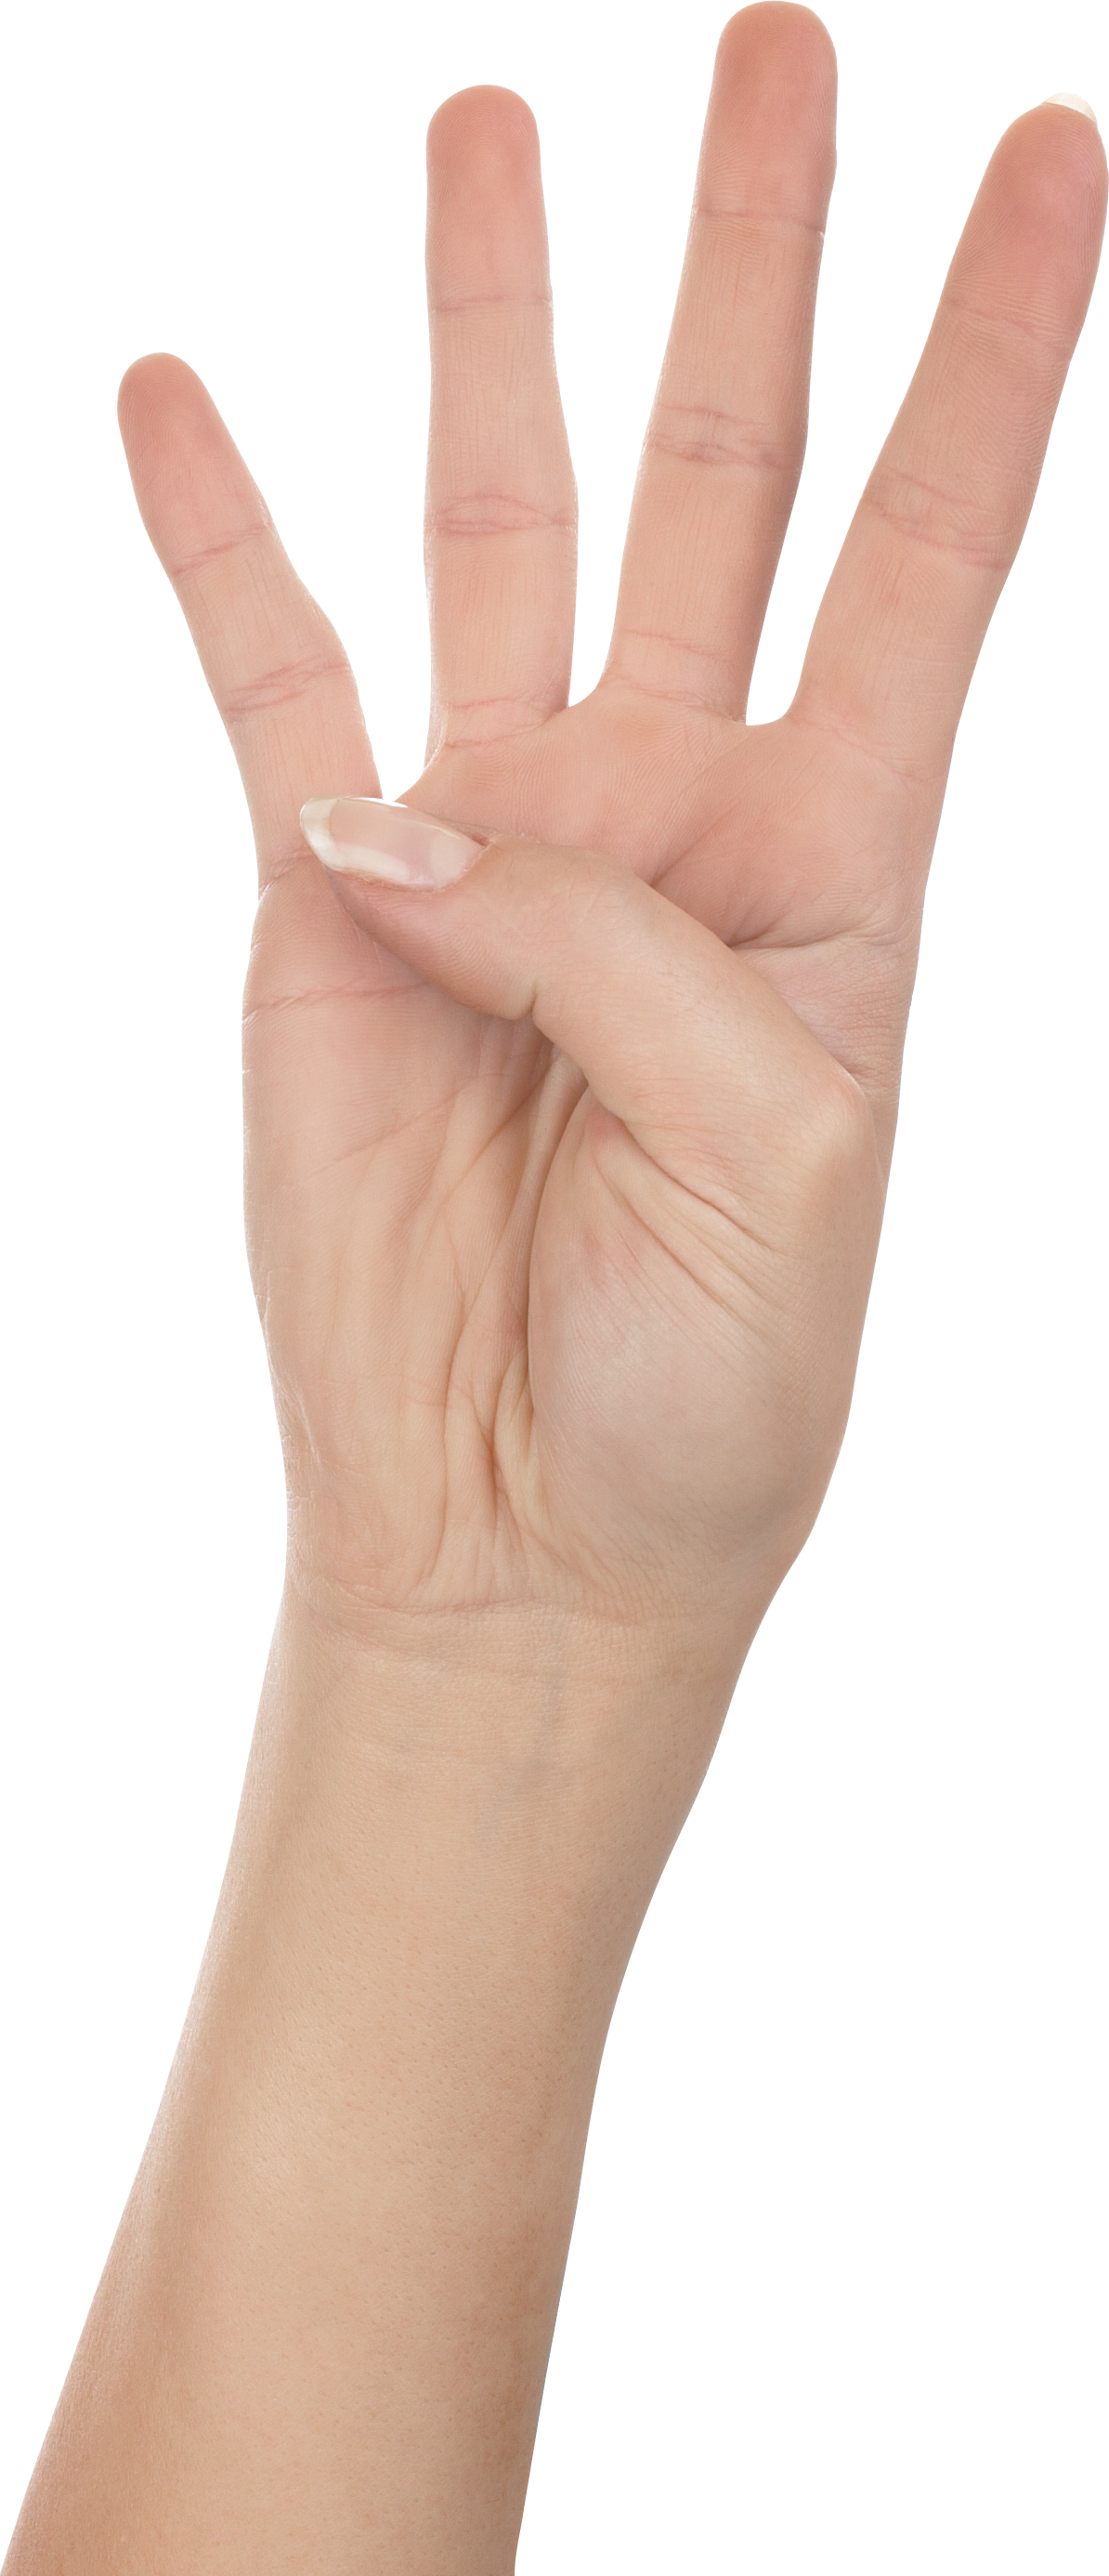 Four Fingers Png Image - Fingers, Transparent background PNG HD thumbnail